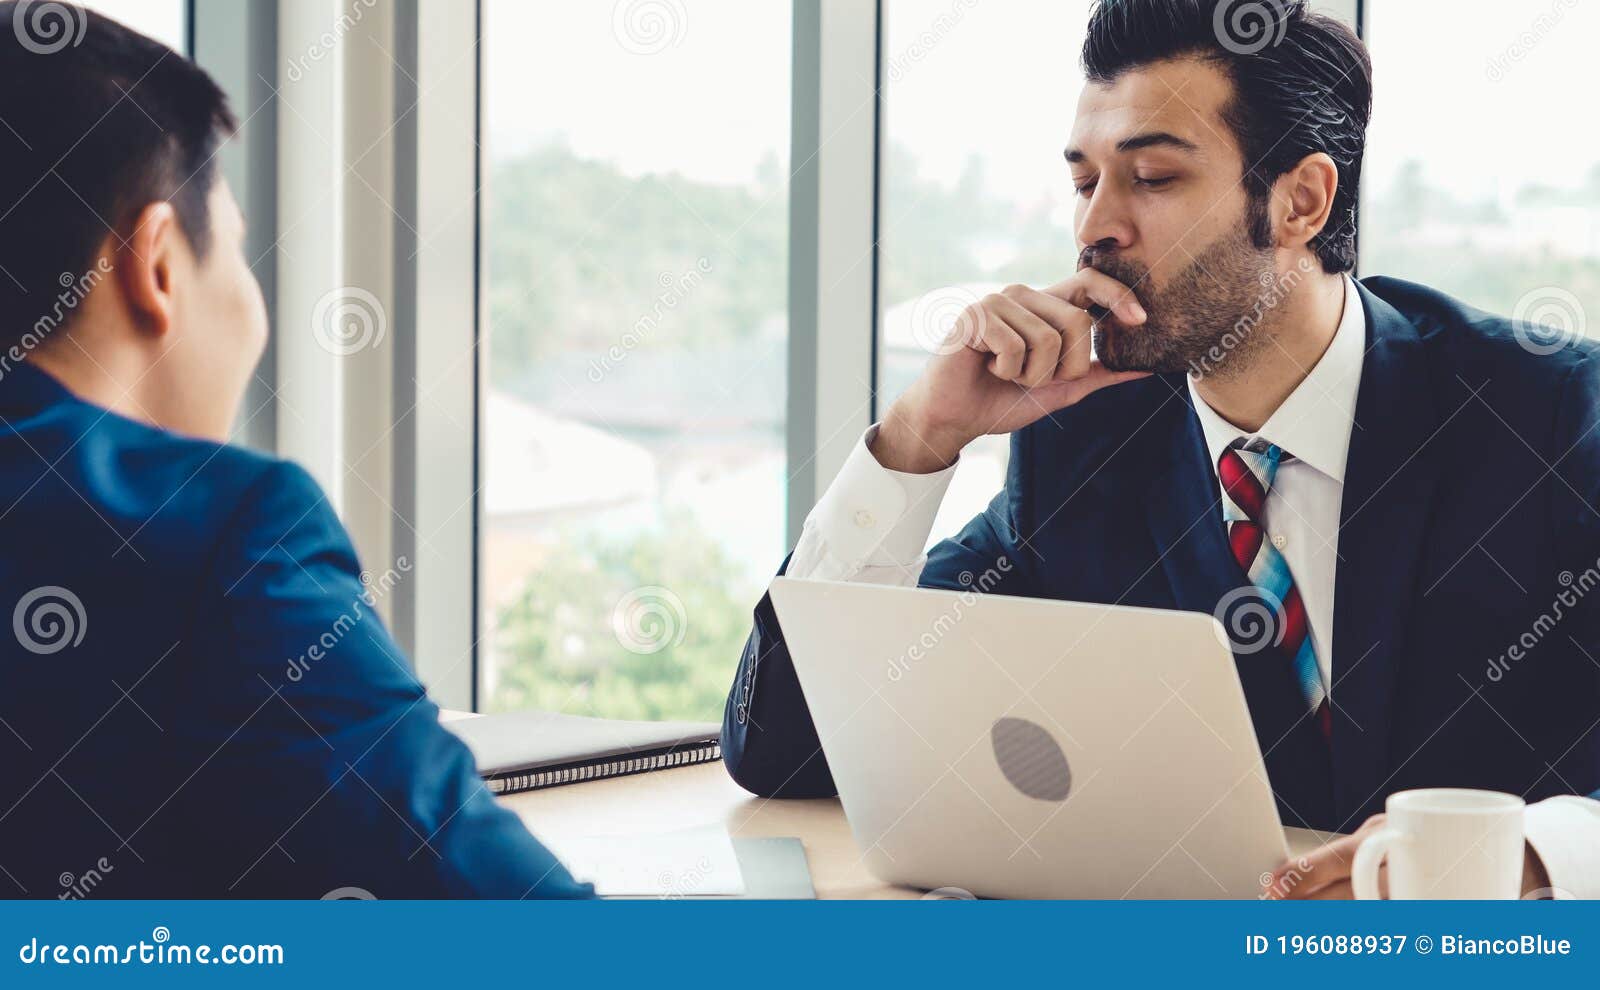 Betaling Vælge bede Job Seeker in Job Interview Meeting with Manager Stock Image - Image of  interviewee, office: 196088937